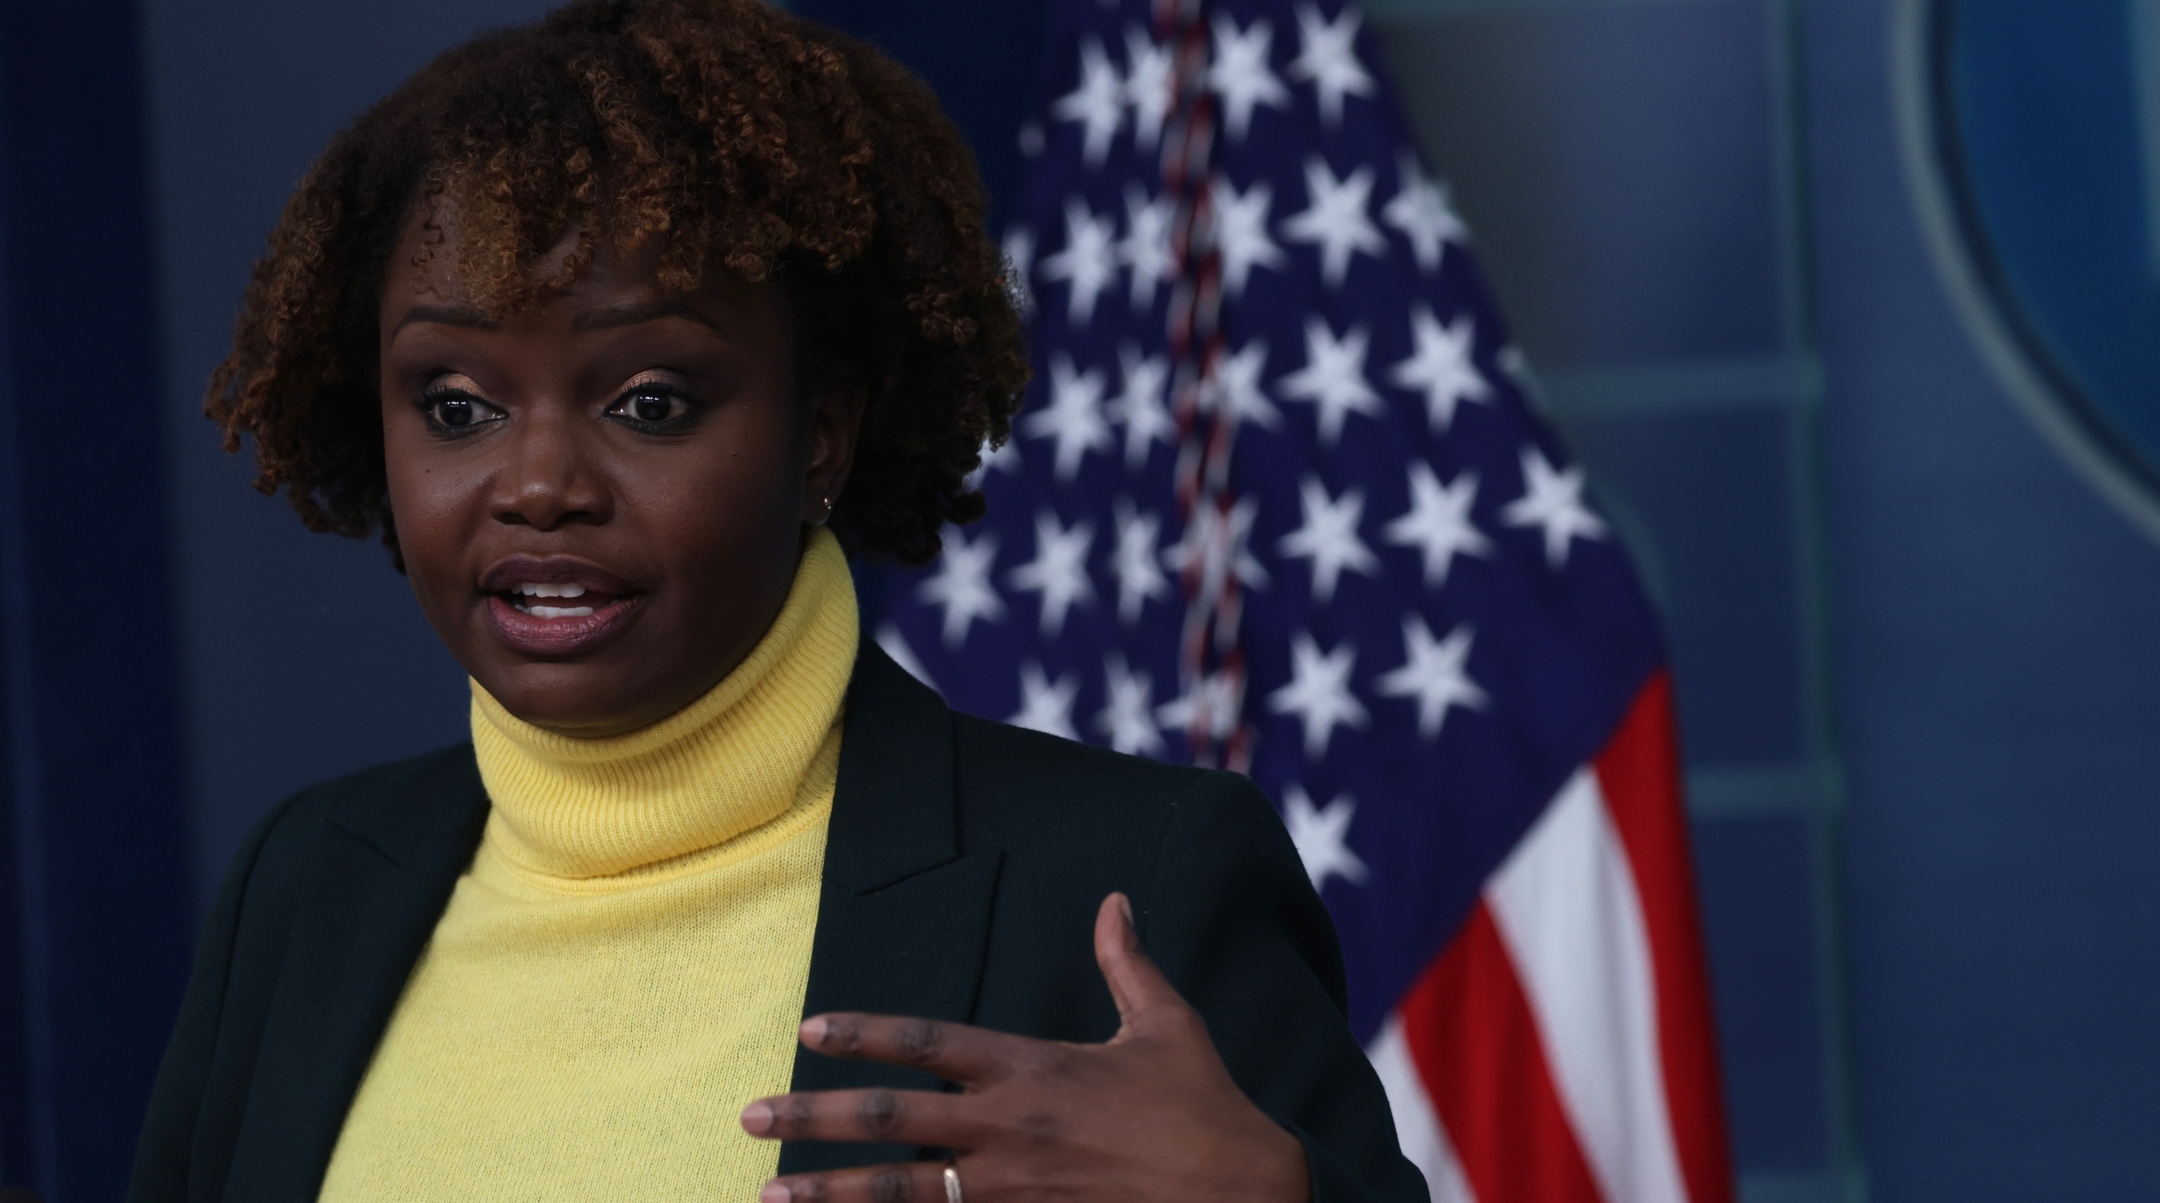 White House Principal Deputy Press Secretary Karine Jean-Pierre conducts a daily press briefing at the James S. Brady Press Briefing Room of the White House, Feb. 14, 2022. (Alex Wong/Getty Images)